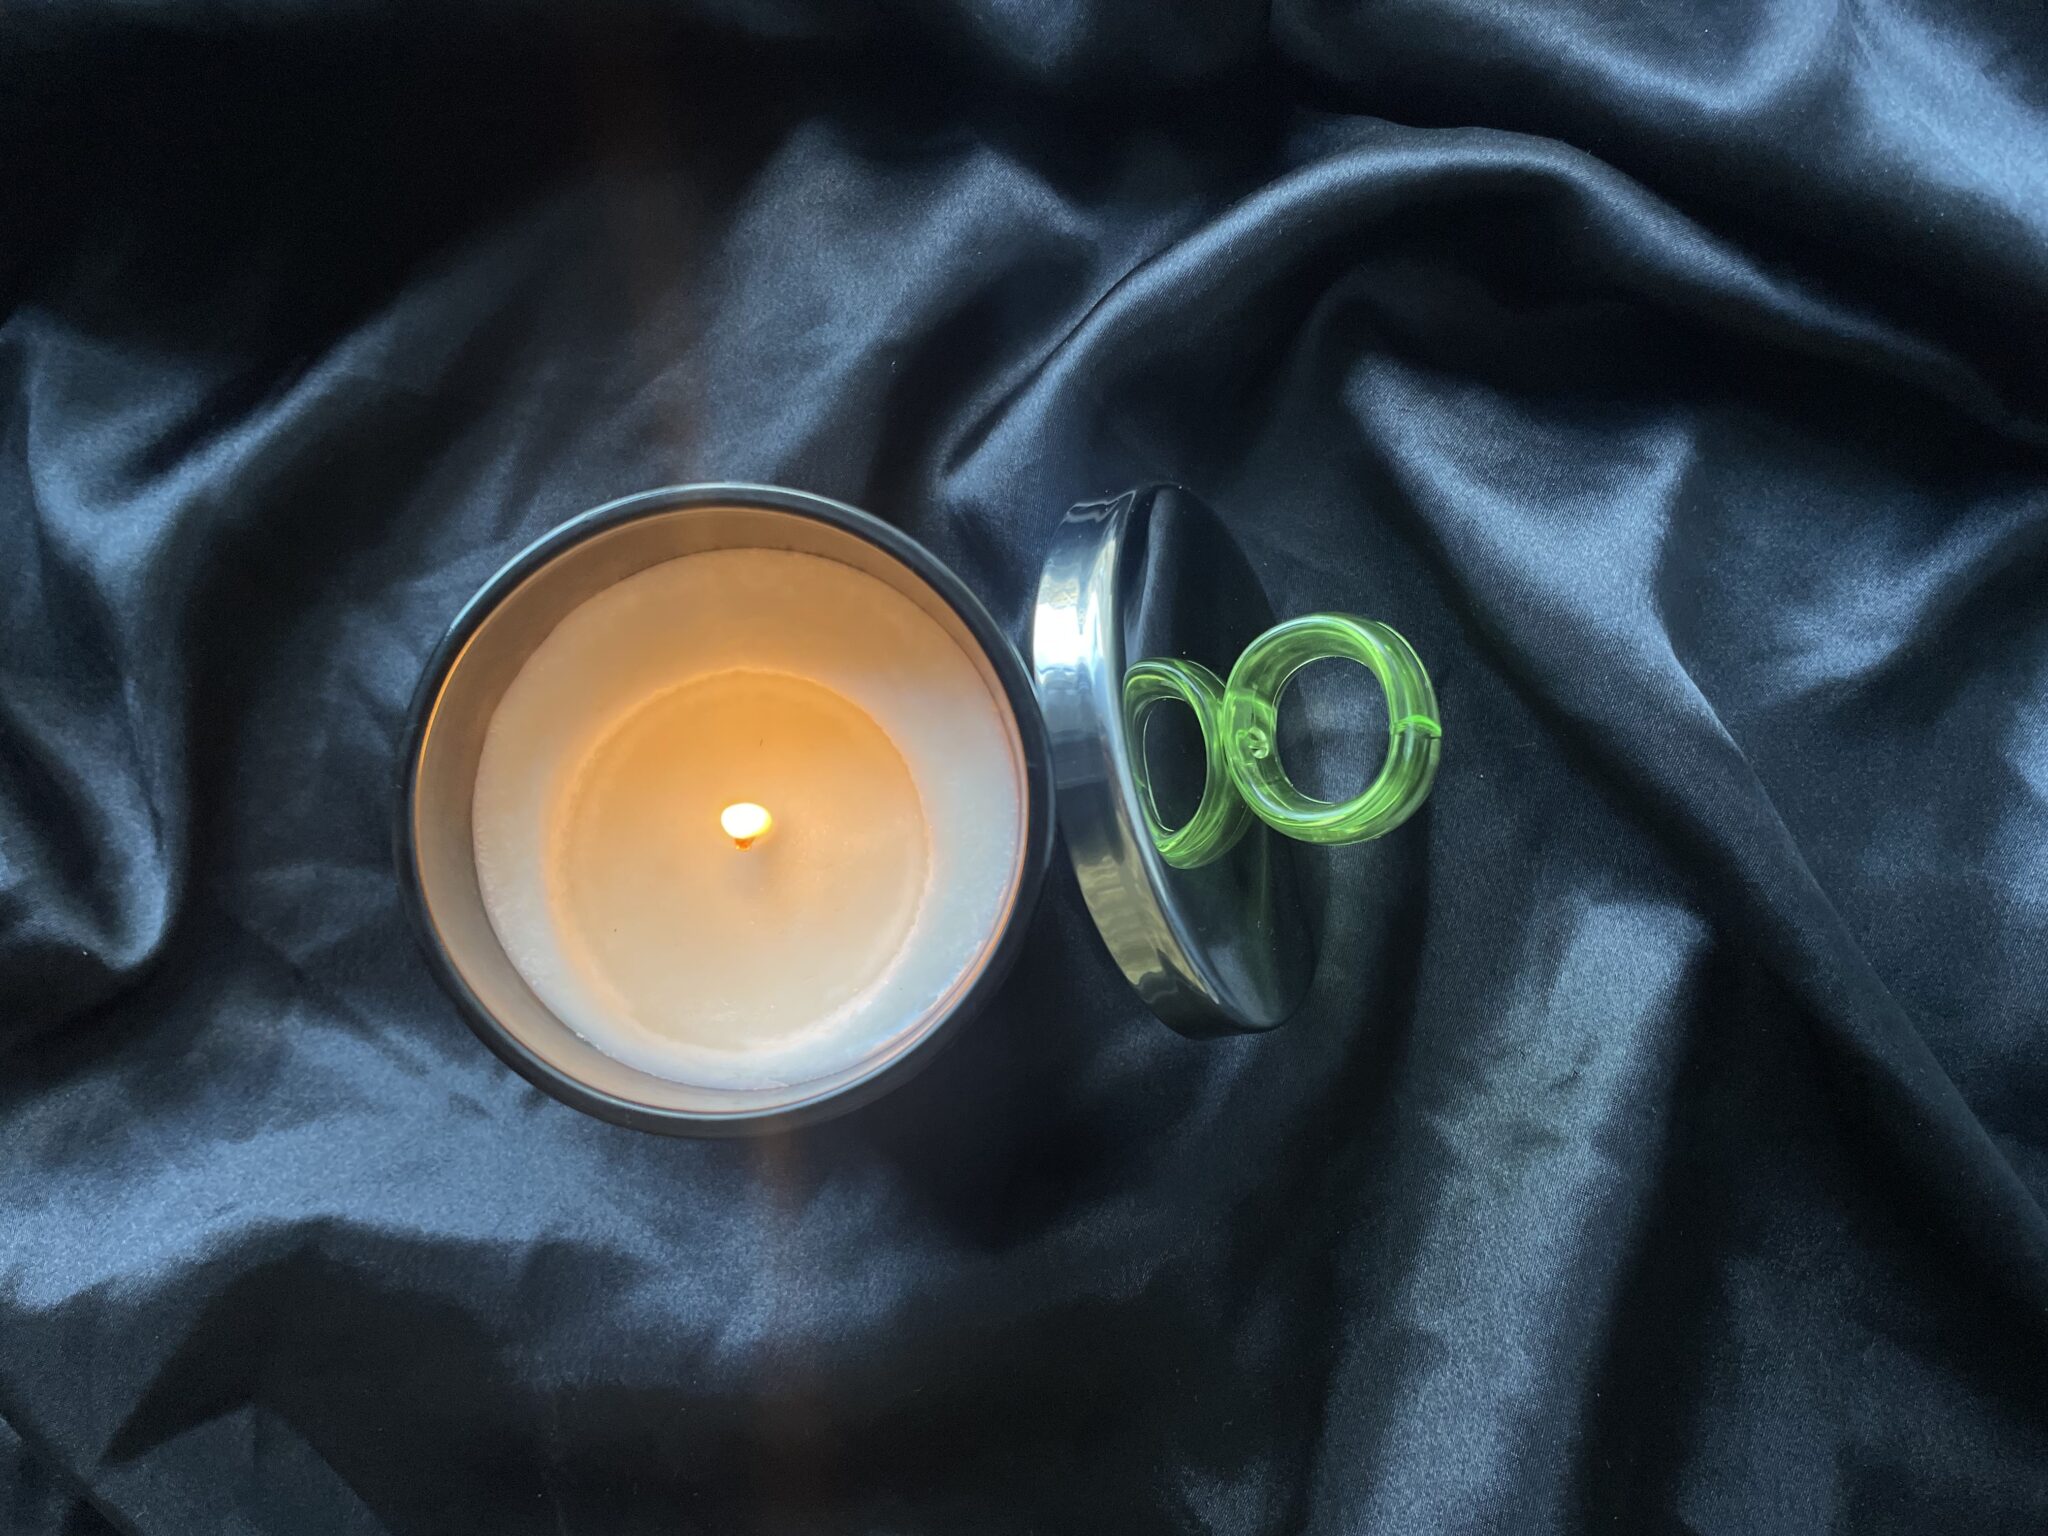 LELO Flickering Touch Massage Candle Pleasure Check: How does LELO Flickering Touch Massage Candle Measure Up?